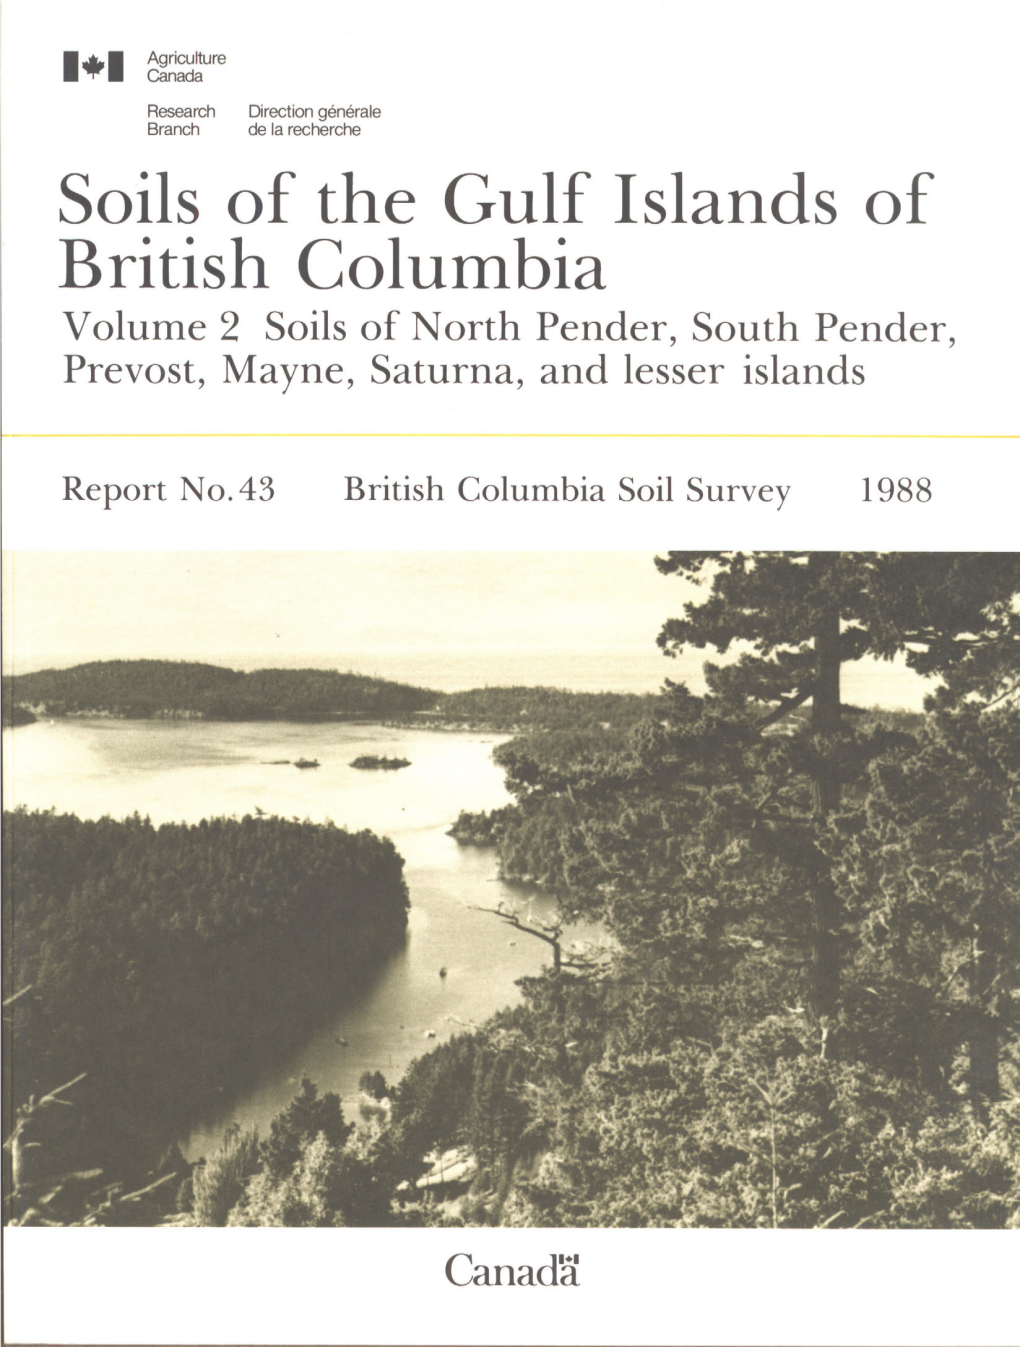 Soils of the Gulf Islands of British Columbia Volume 2 Soils of North Pender, South Pender Prevost, Mayne, Saturna, and Lesser Islands